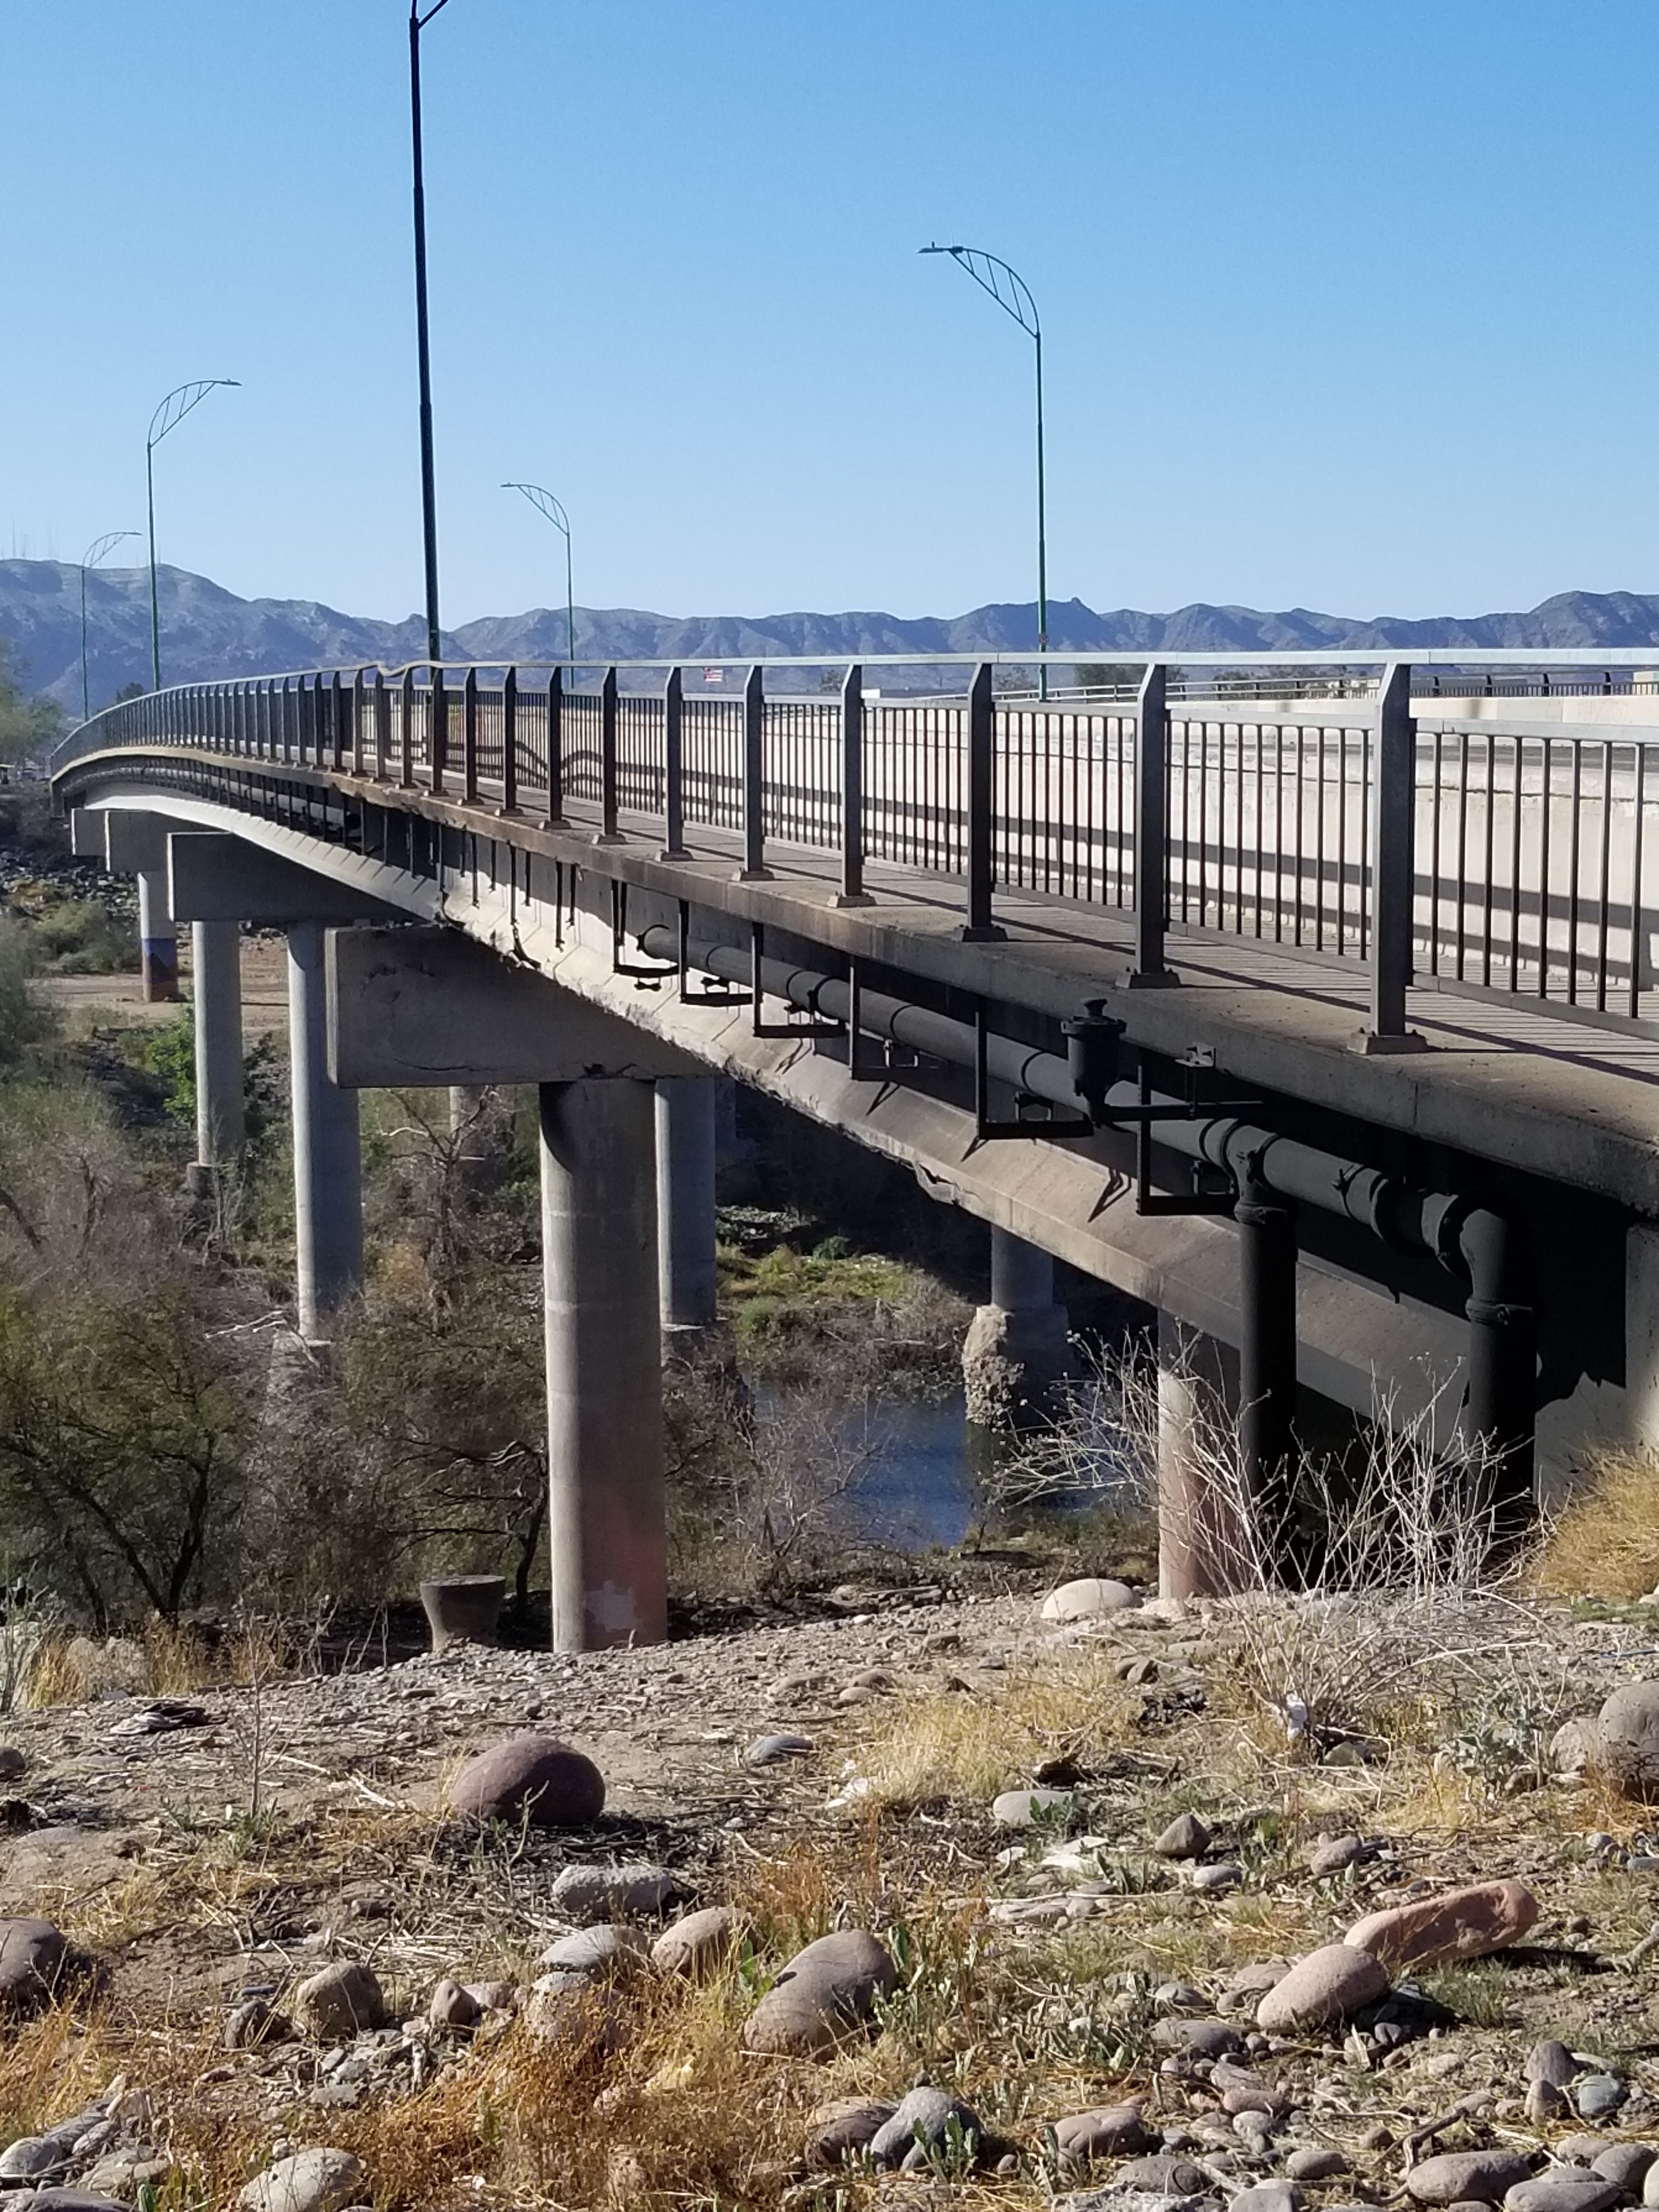 Damage to the bridge from fire